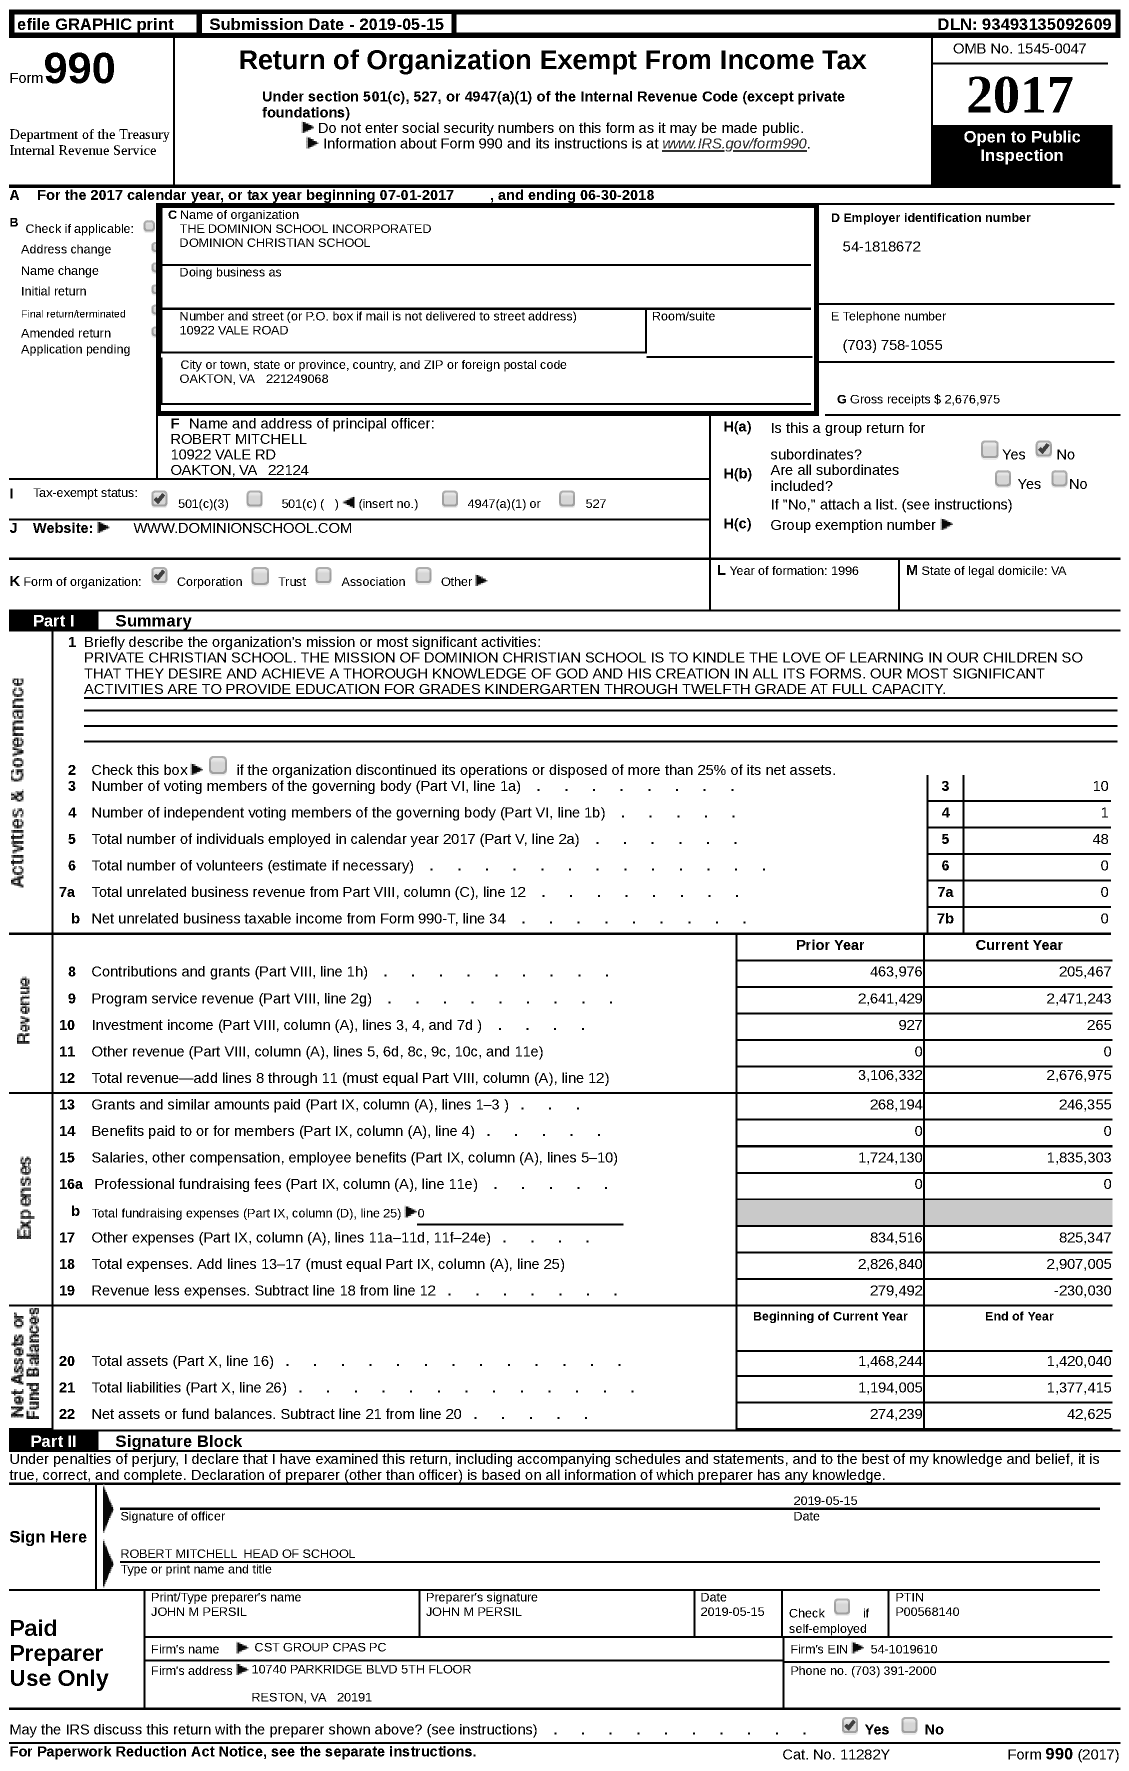 Image of first page of 2017 Form 990 for The Dominion School Incorporated Dominion Christian School